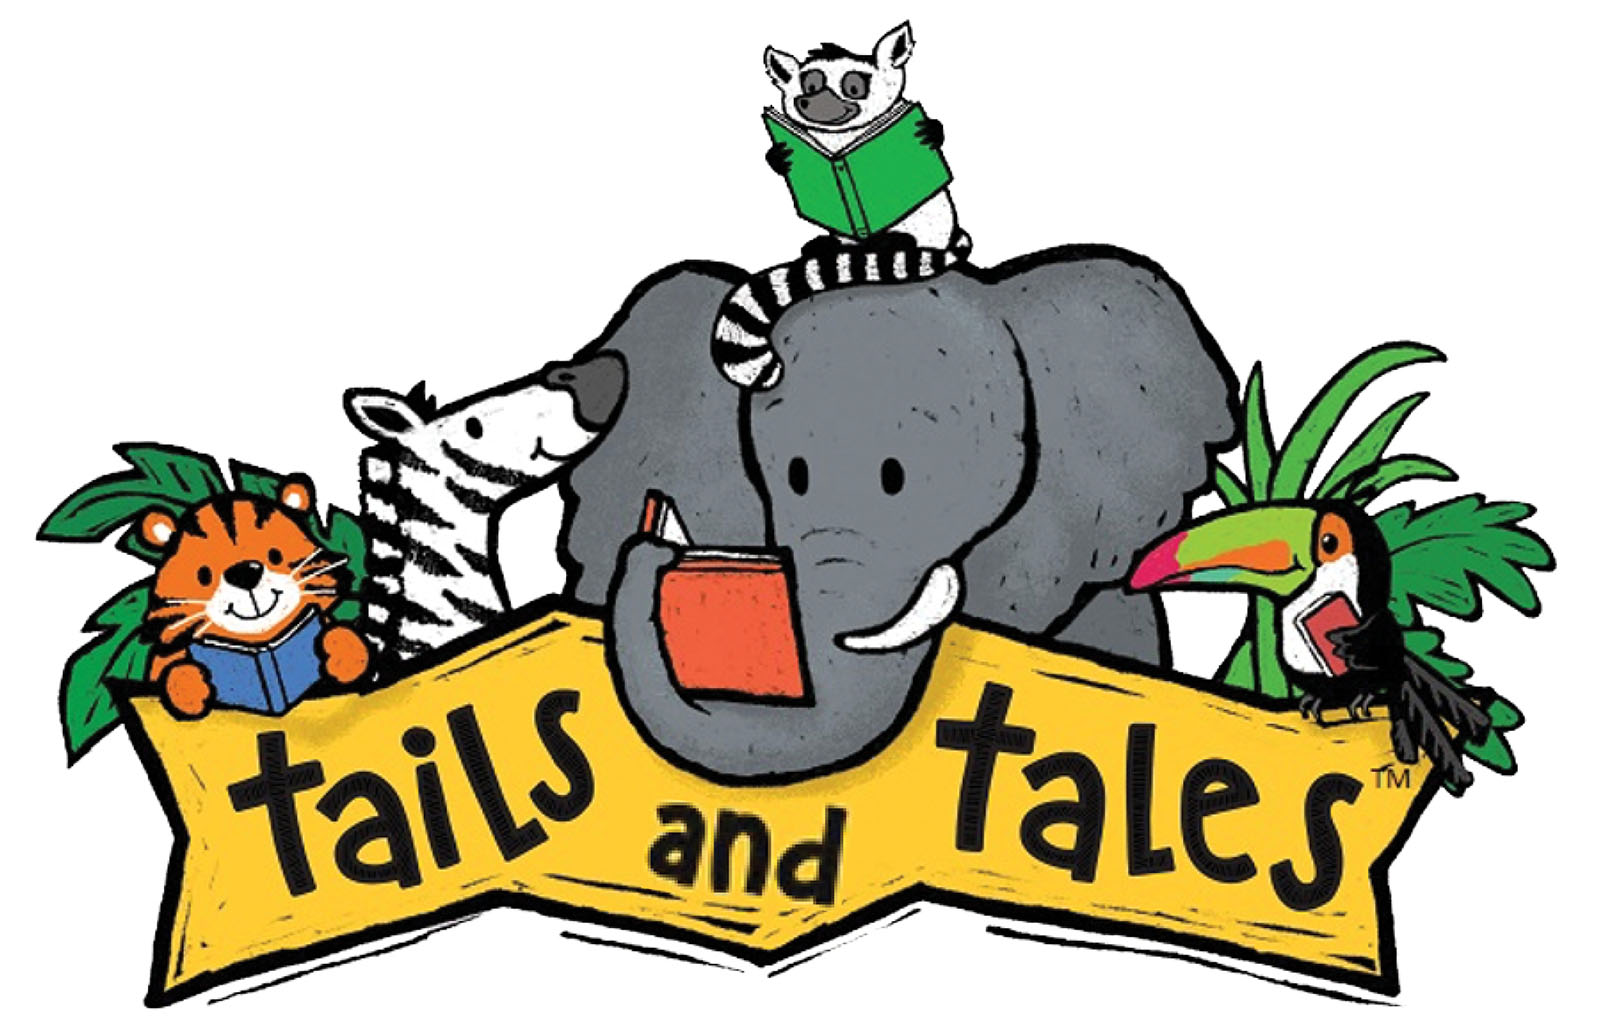 Assortment of animals with the tagline "tails and tales"